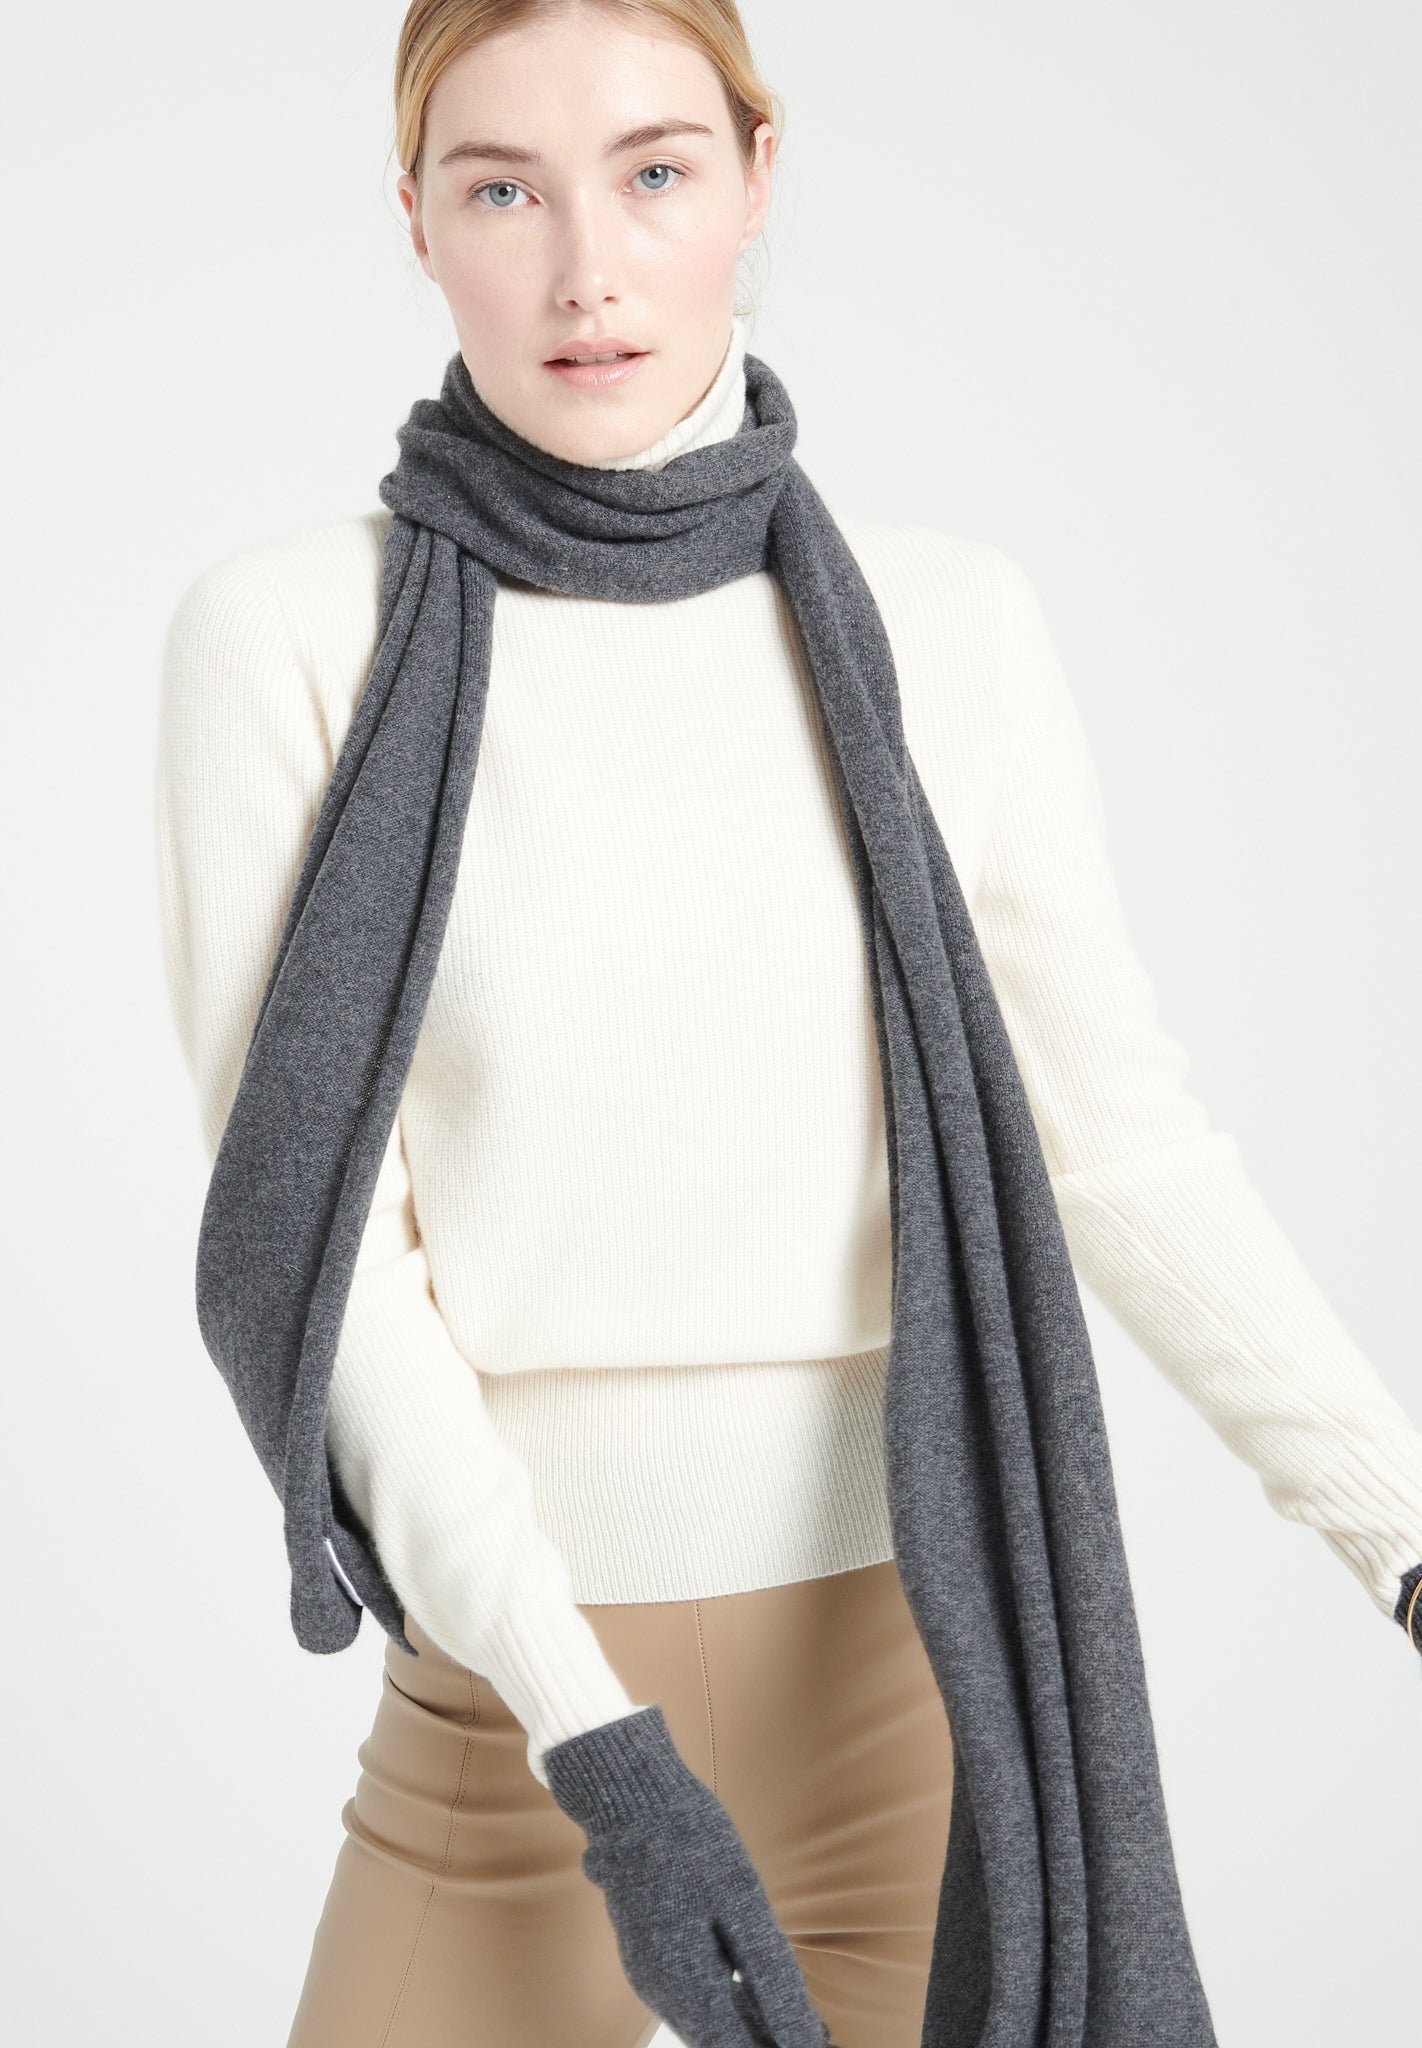 Charcoal gray cashmere scarf